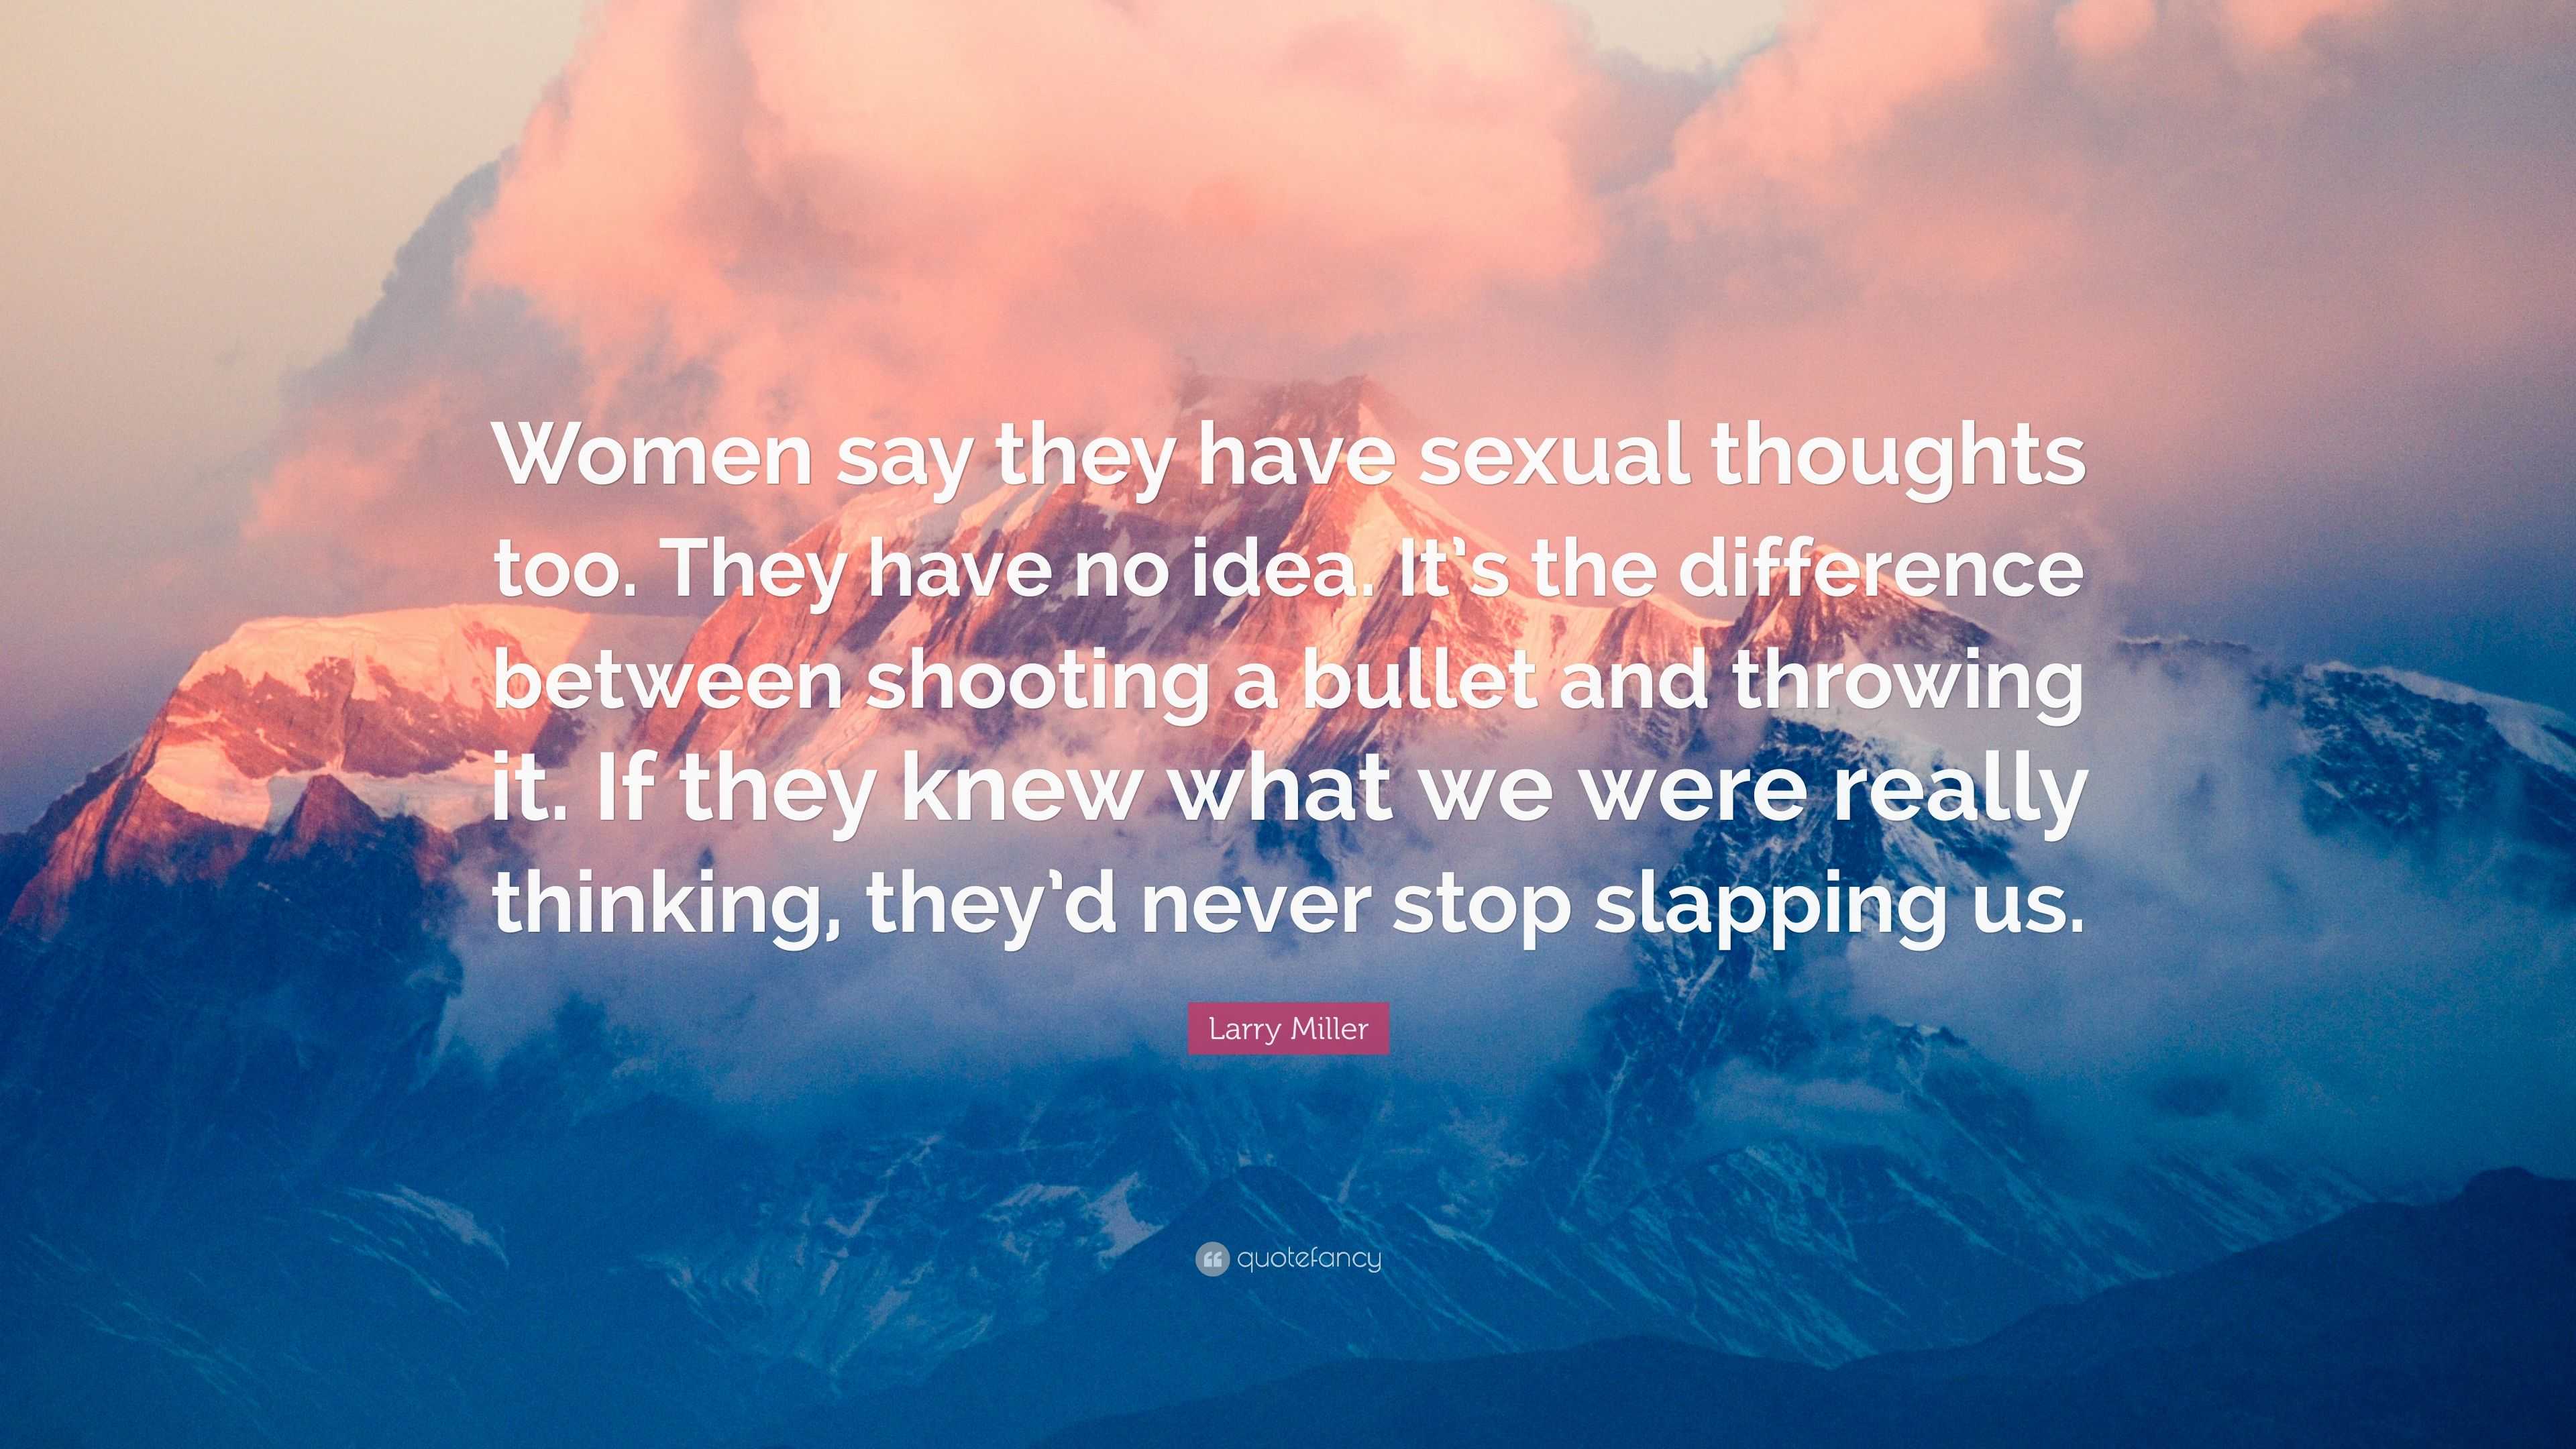 Larry Miller Quote “women Say They Have Sexual Thoughts Too They Have No Idea It’s The